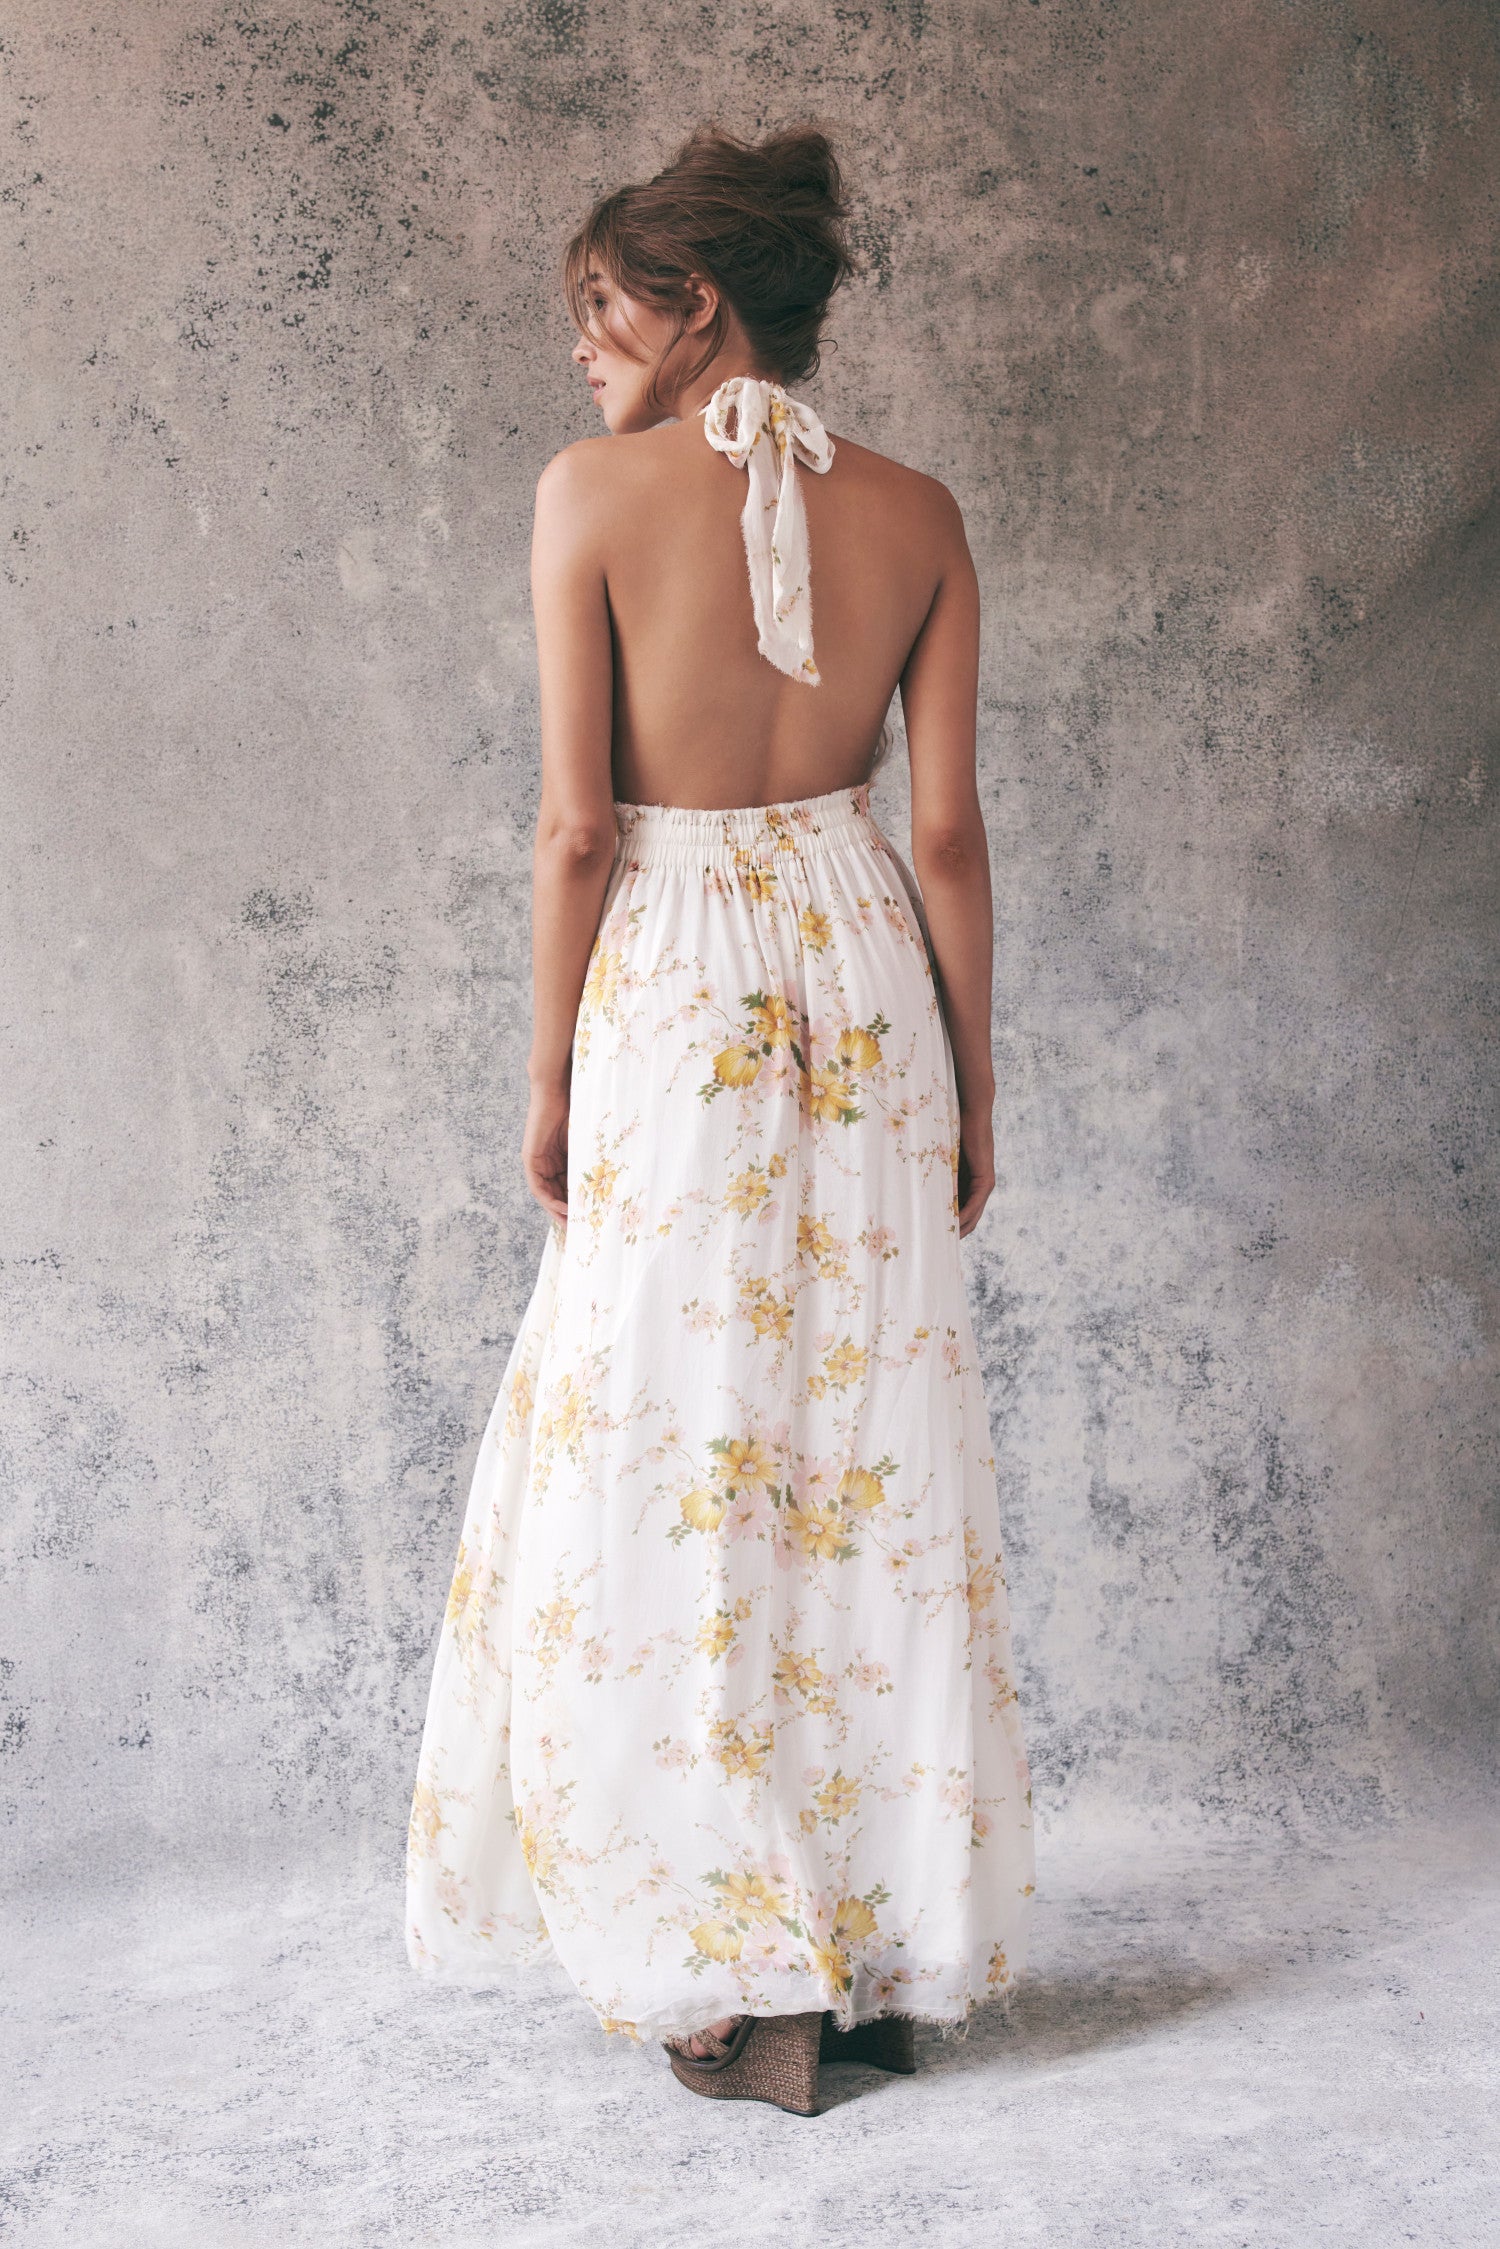 Back image of white and yellow floral halter maxi dress